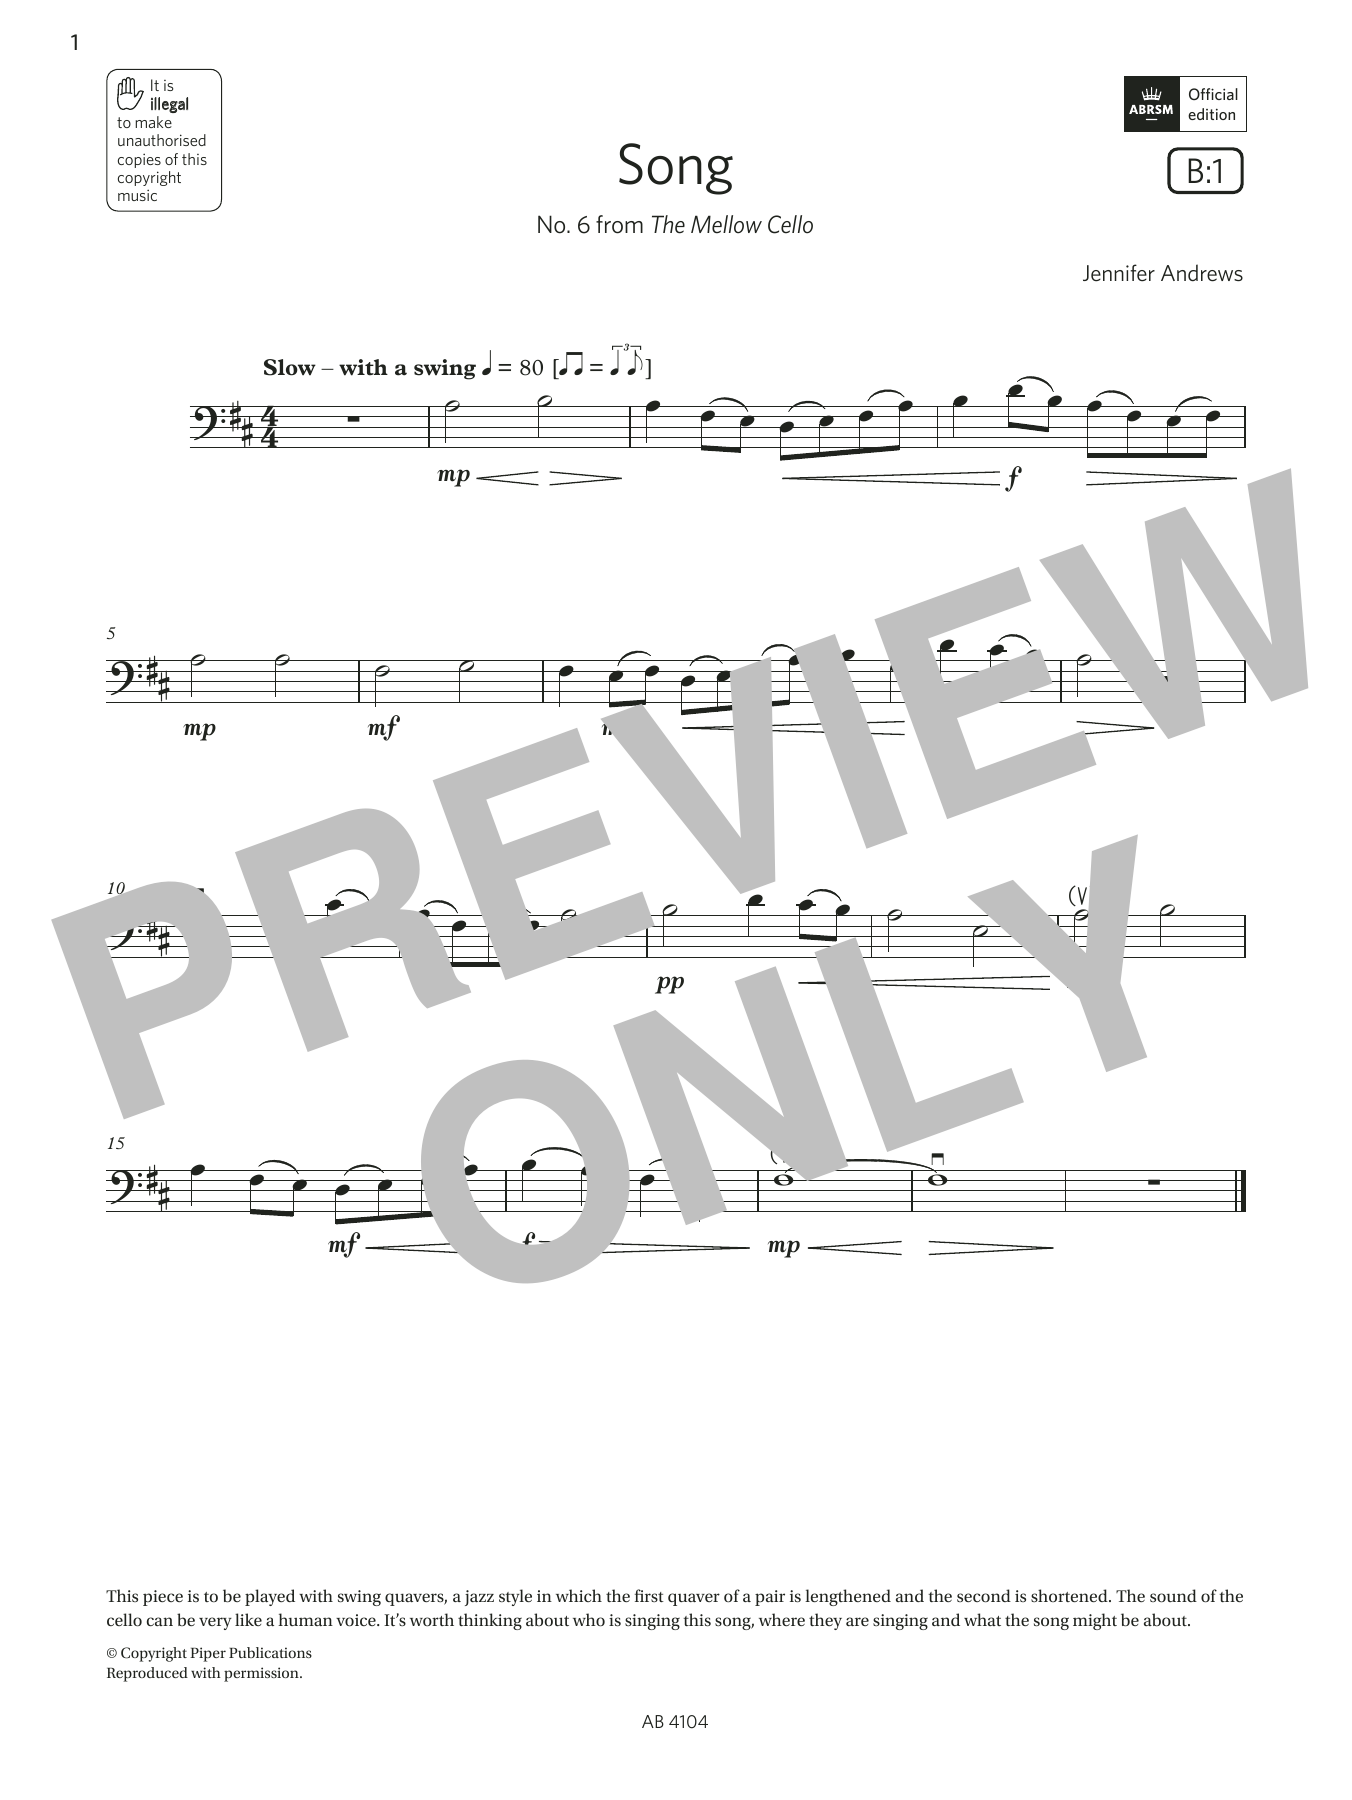 Download Jennifer Andrews Song (Grade 1, B1, from the ABRSM Cello Sheet Music